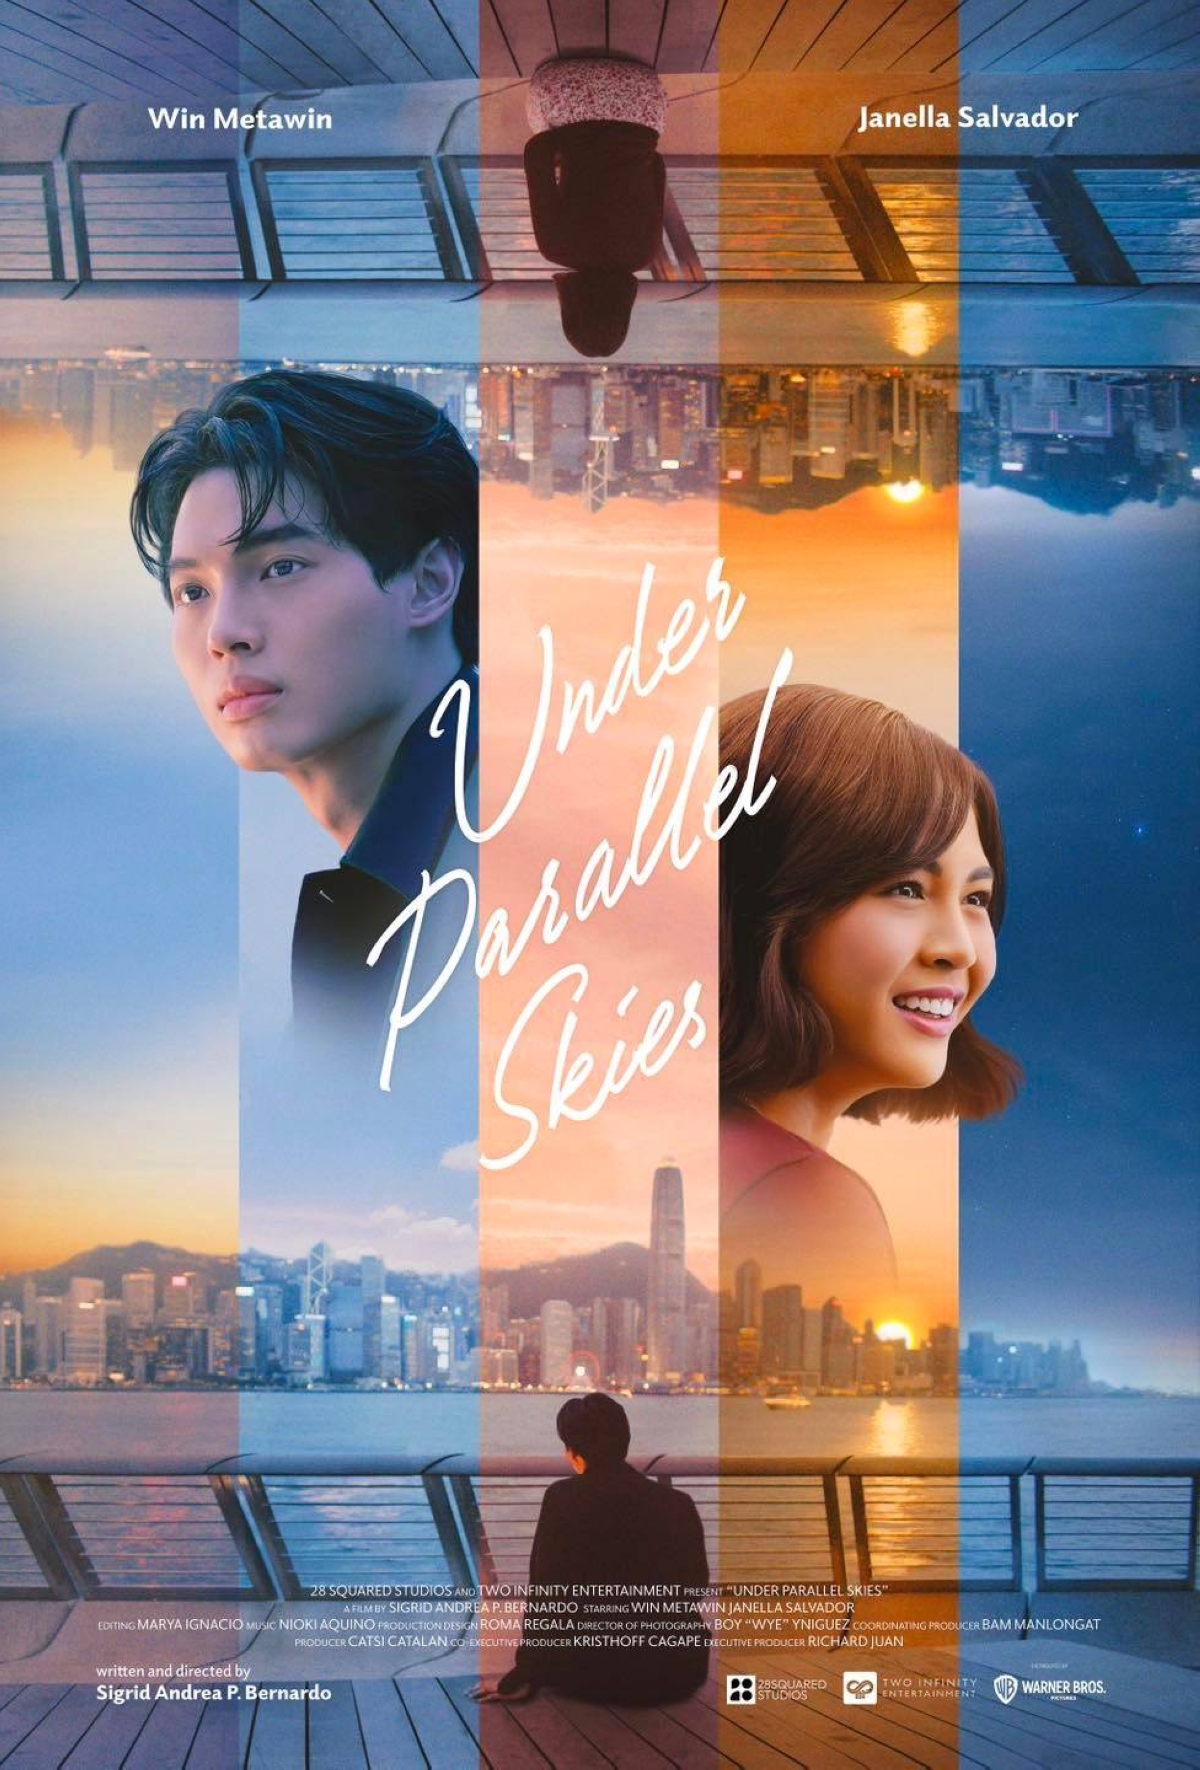 Thai actor Win Metawin and Filipina actress Janella Salvador star in a Hong Kong romance, 'Under Parallel Skies,' where a search for the past leads to love.